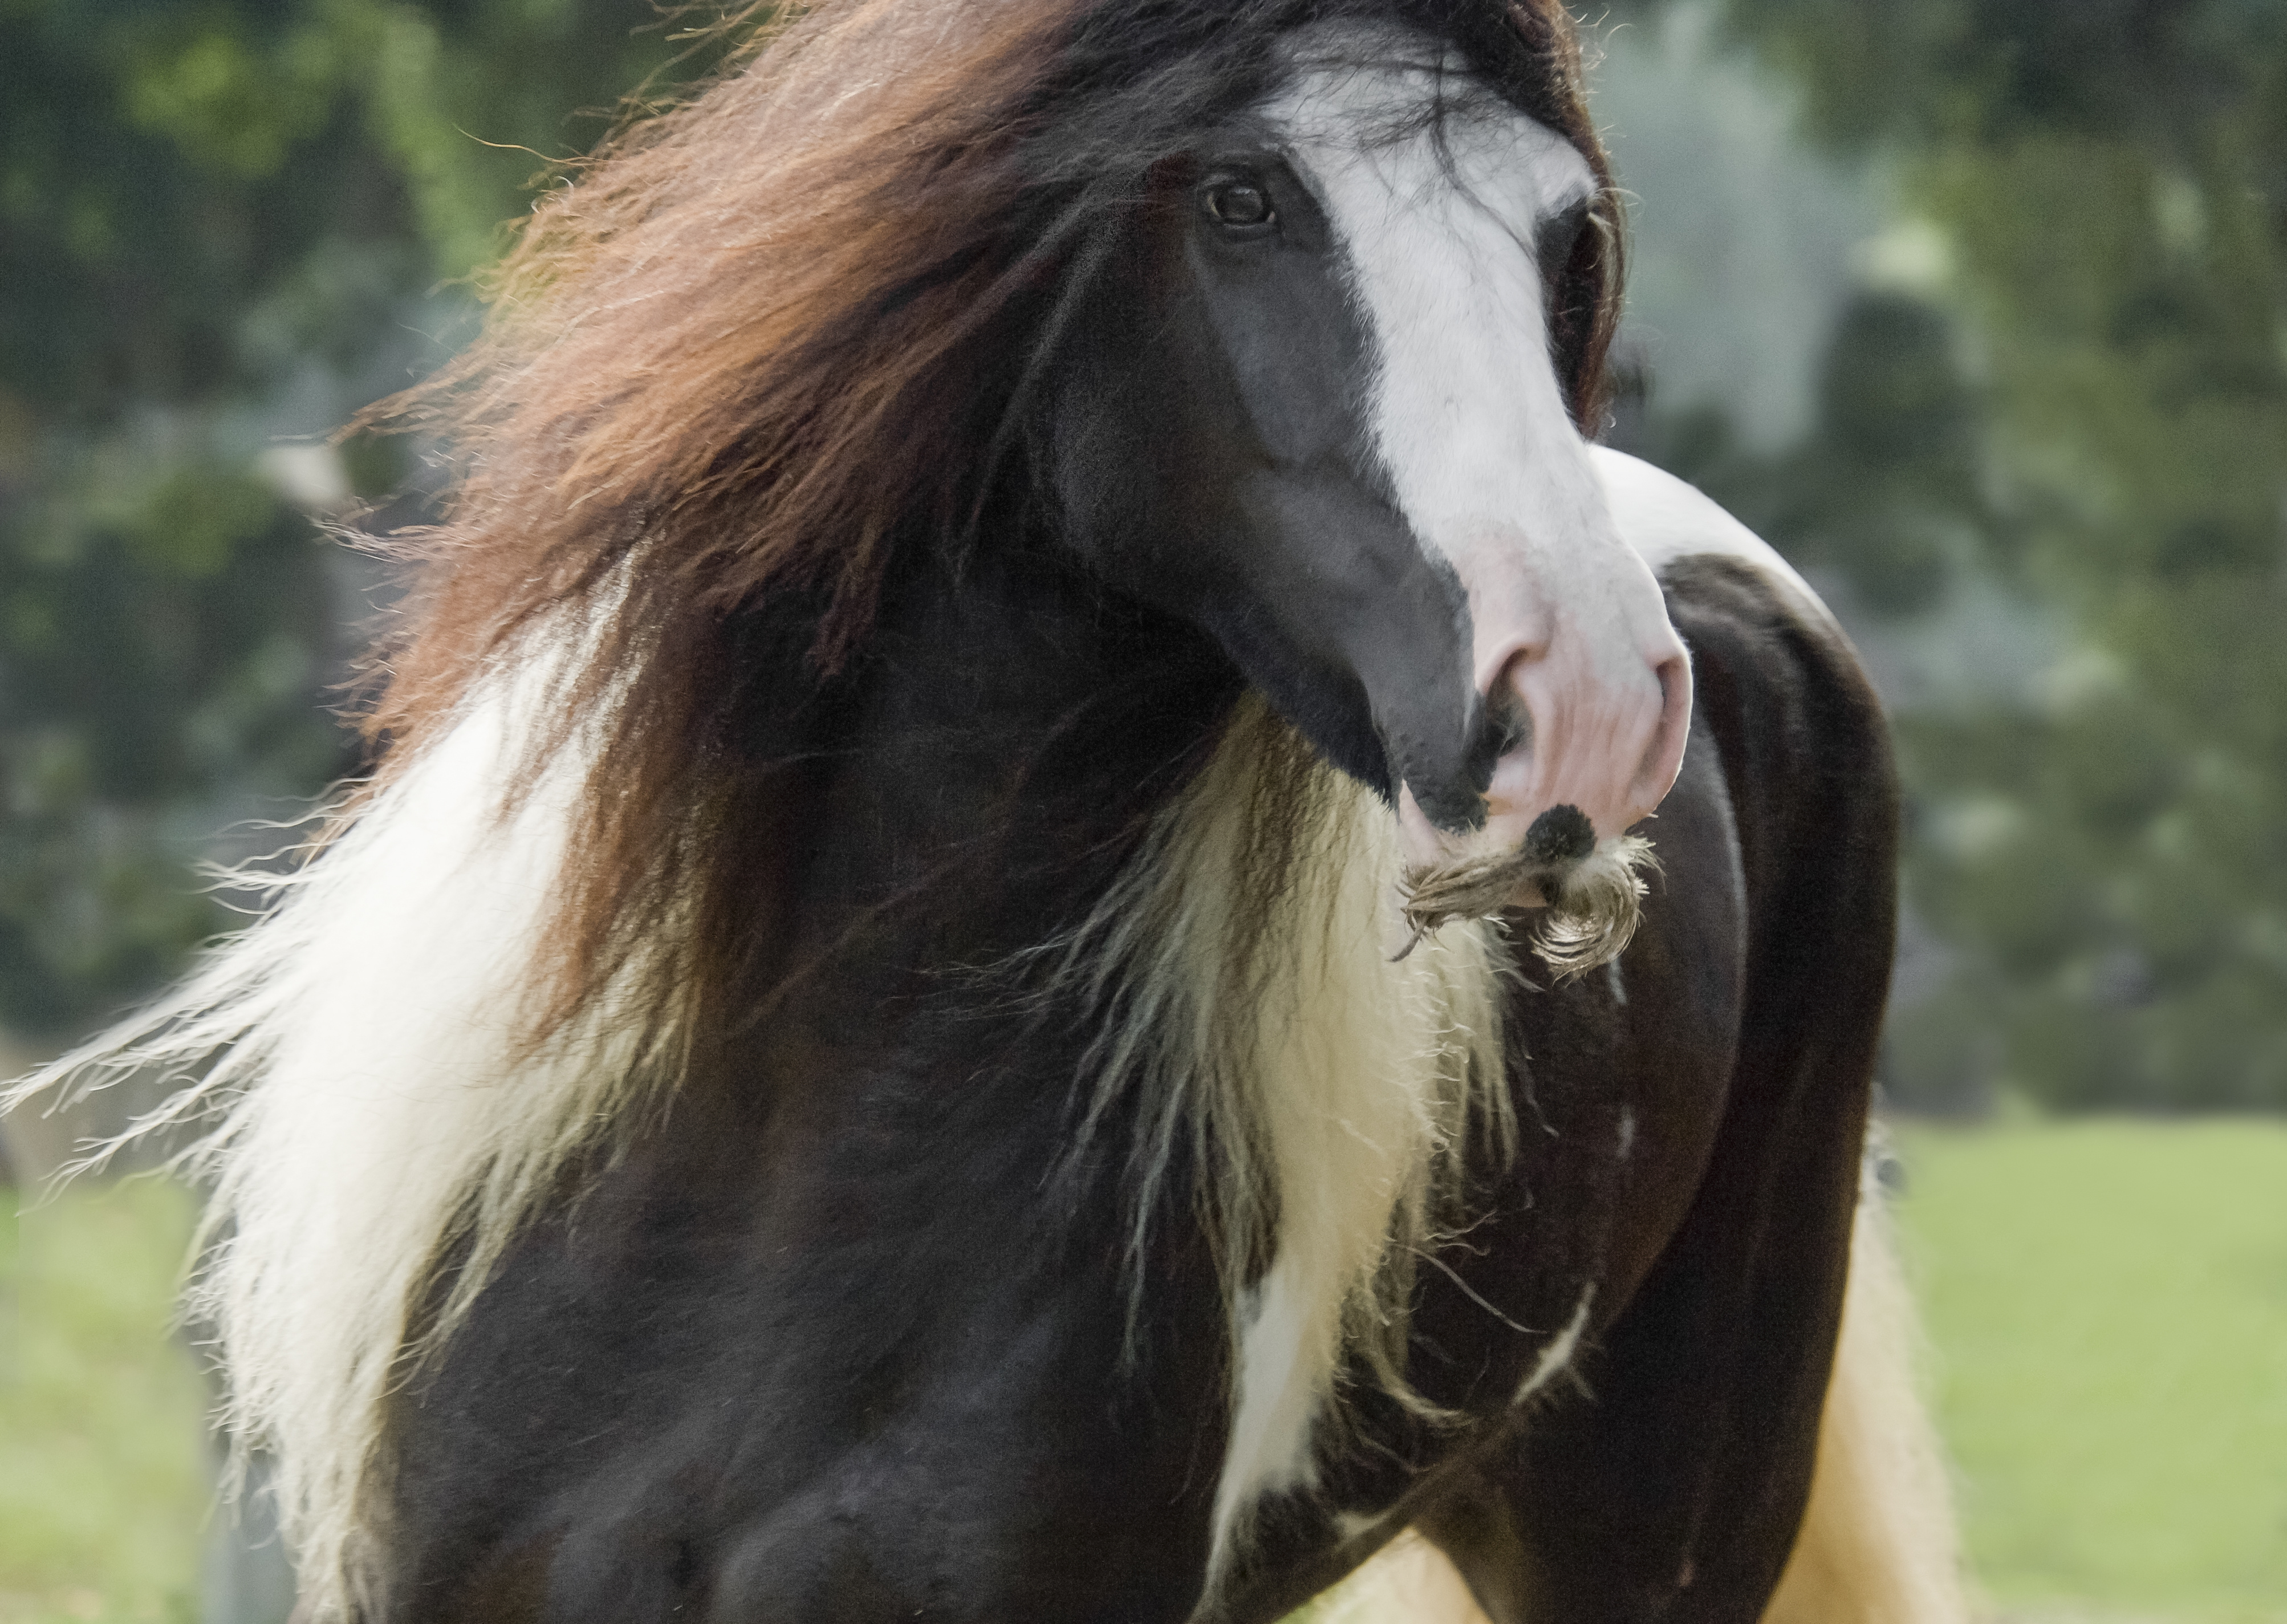 Gypsy Vanner Horse mare sporting extreme mustach